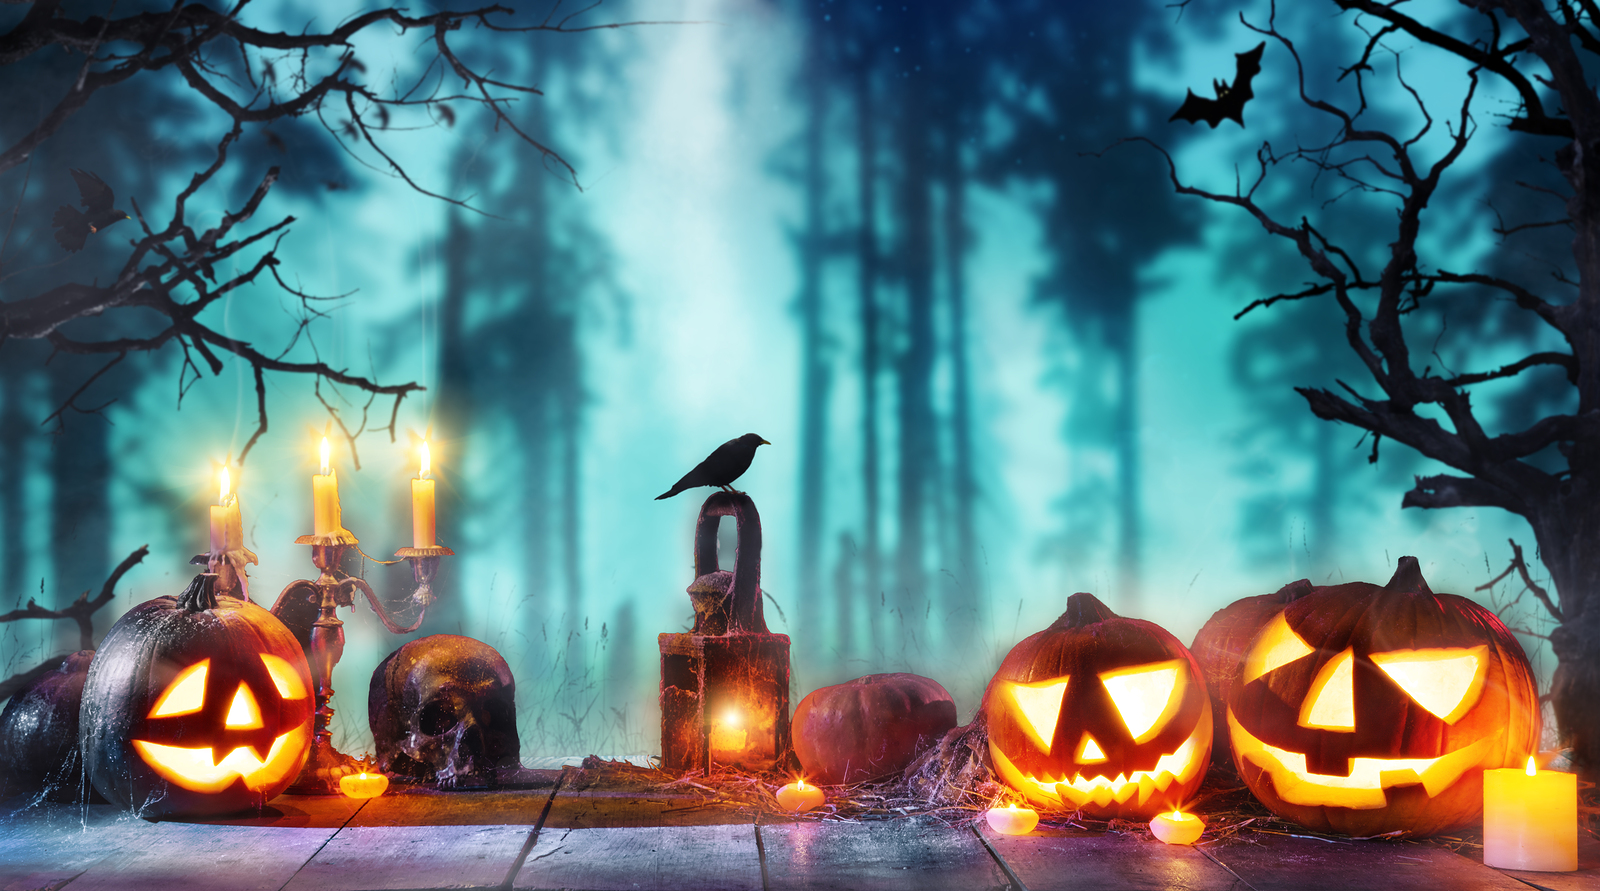 Time To Plan For A Spooky Halloween Getaway?